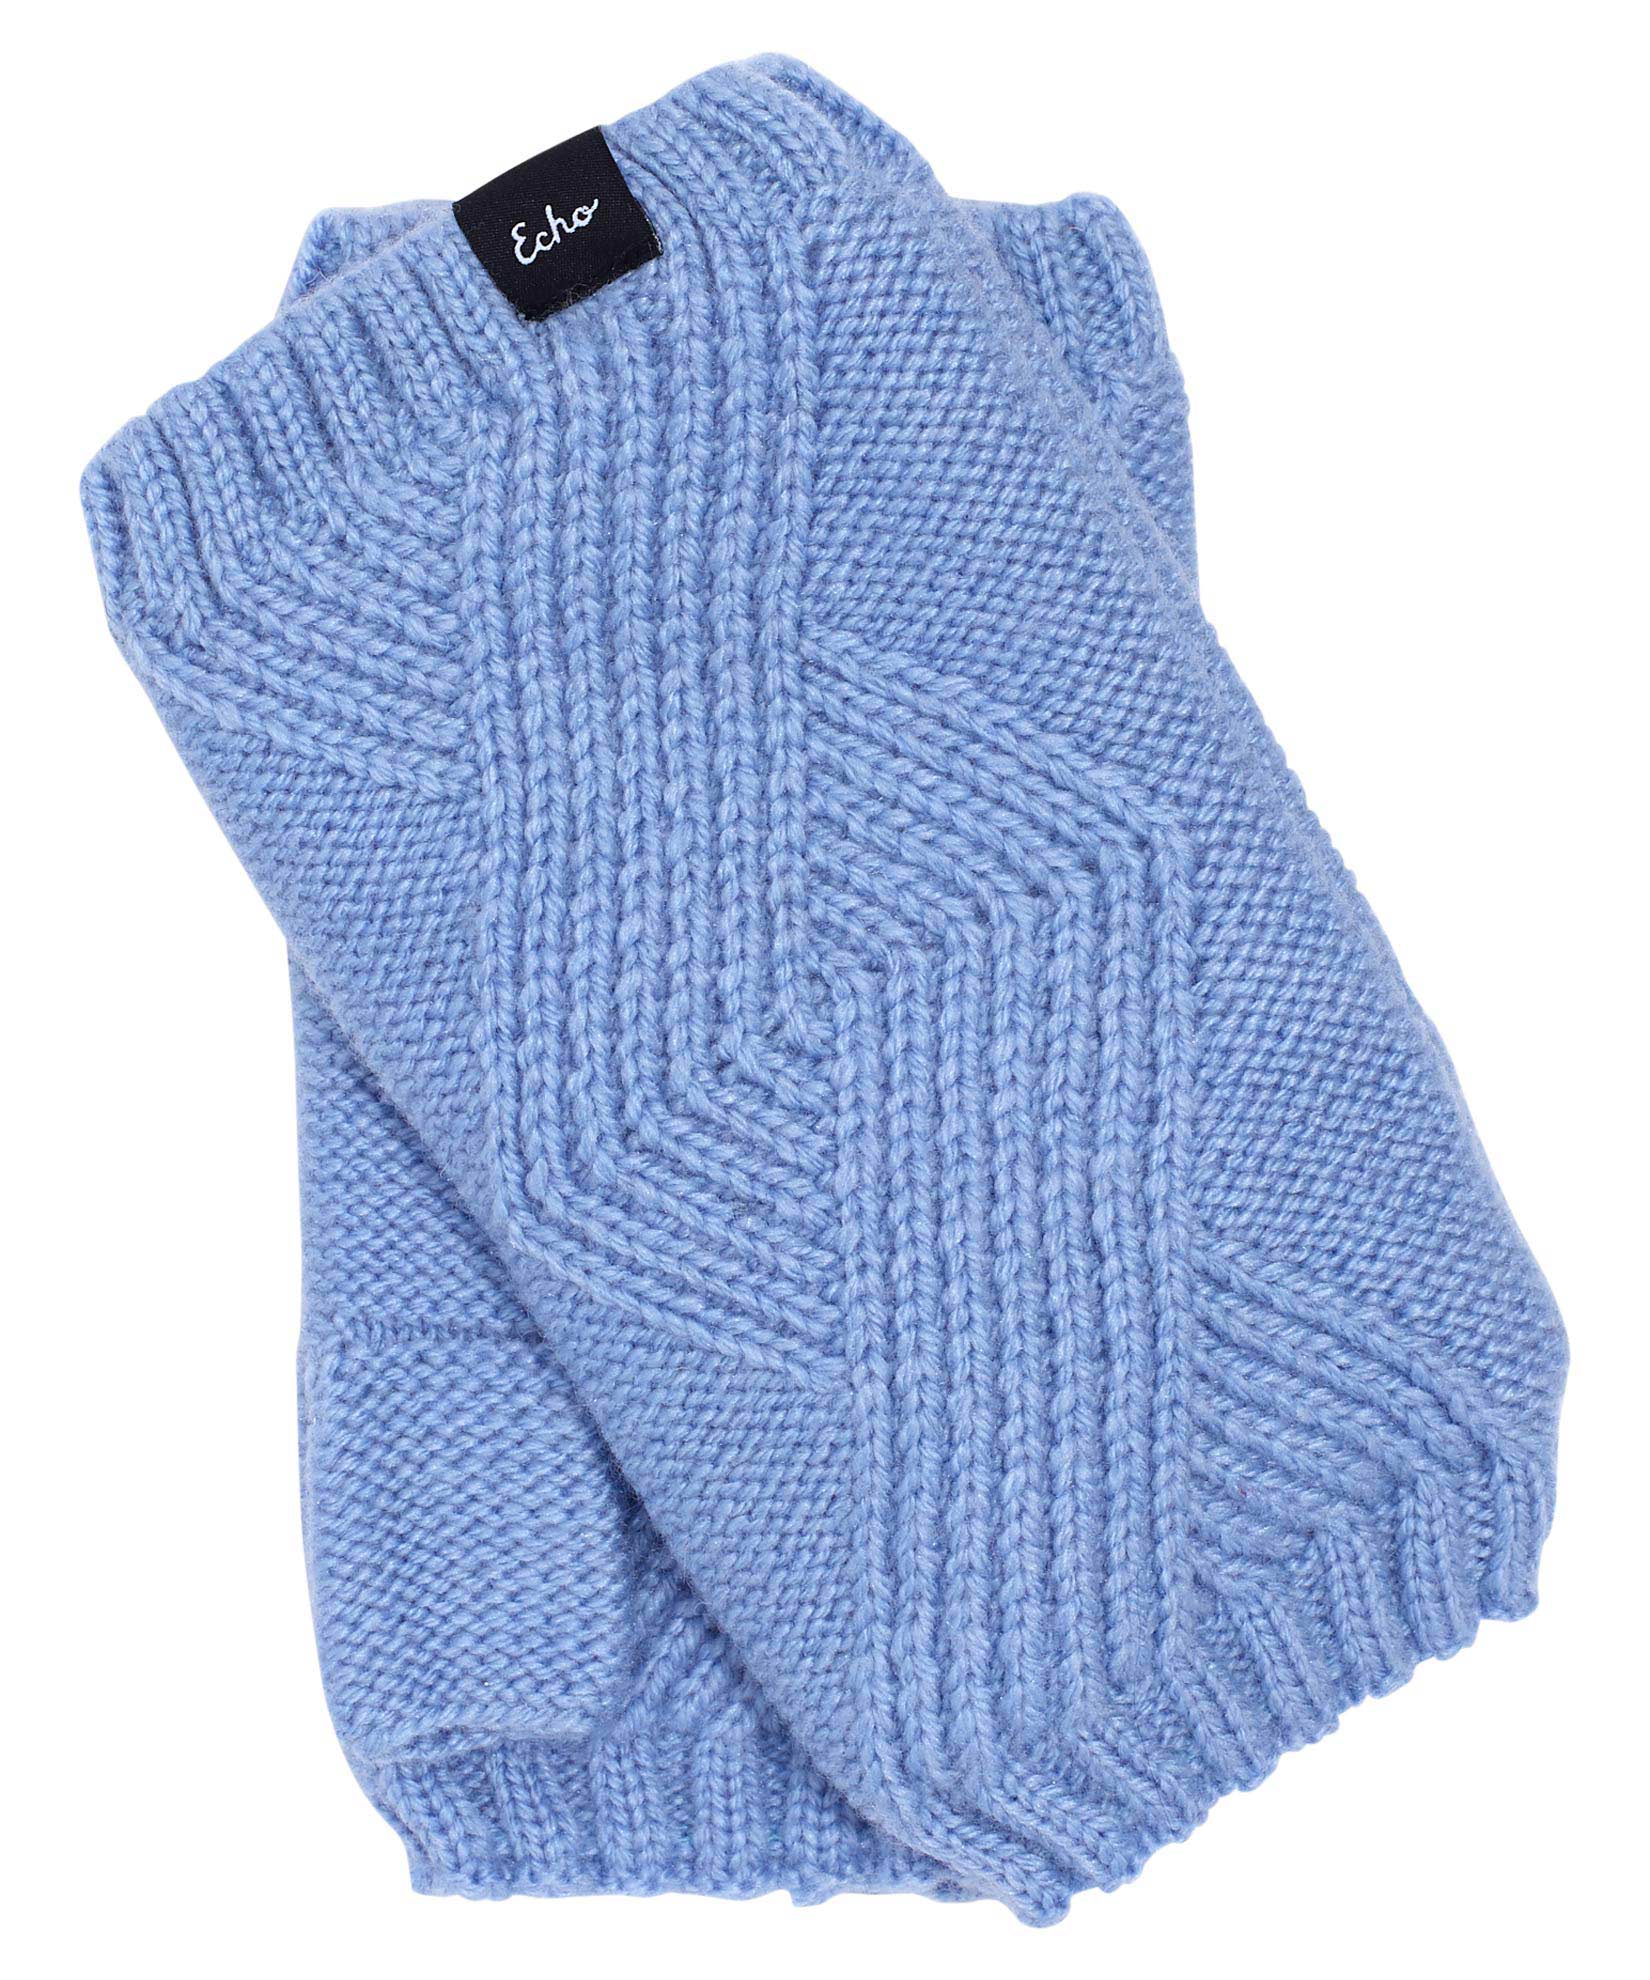 Recycled Cable Fingerless Glove in color Blue Sky